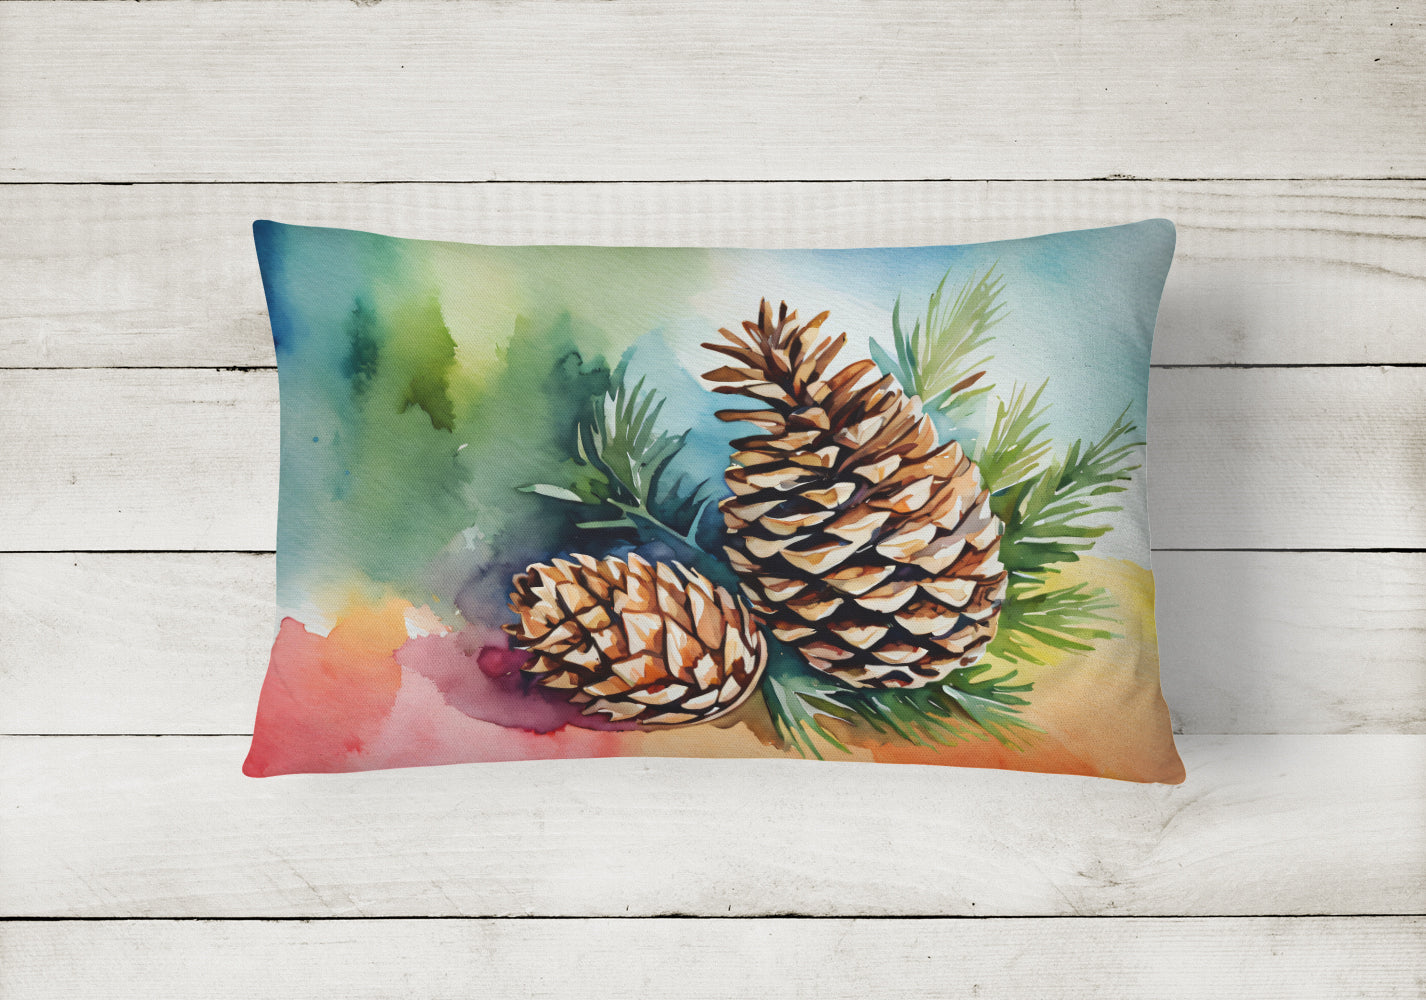 Maine White Pine Cone and Tassels in Watercolor Fabric Decorative Pillow